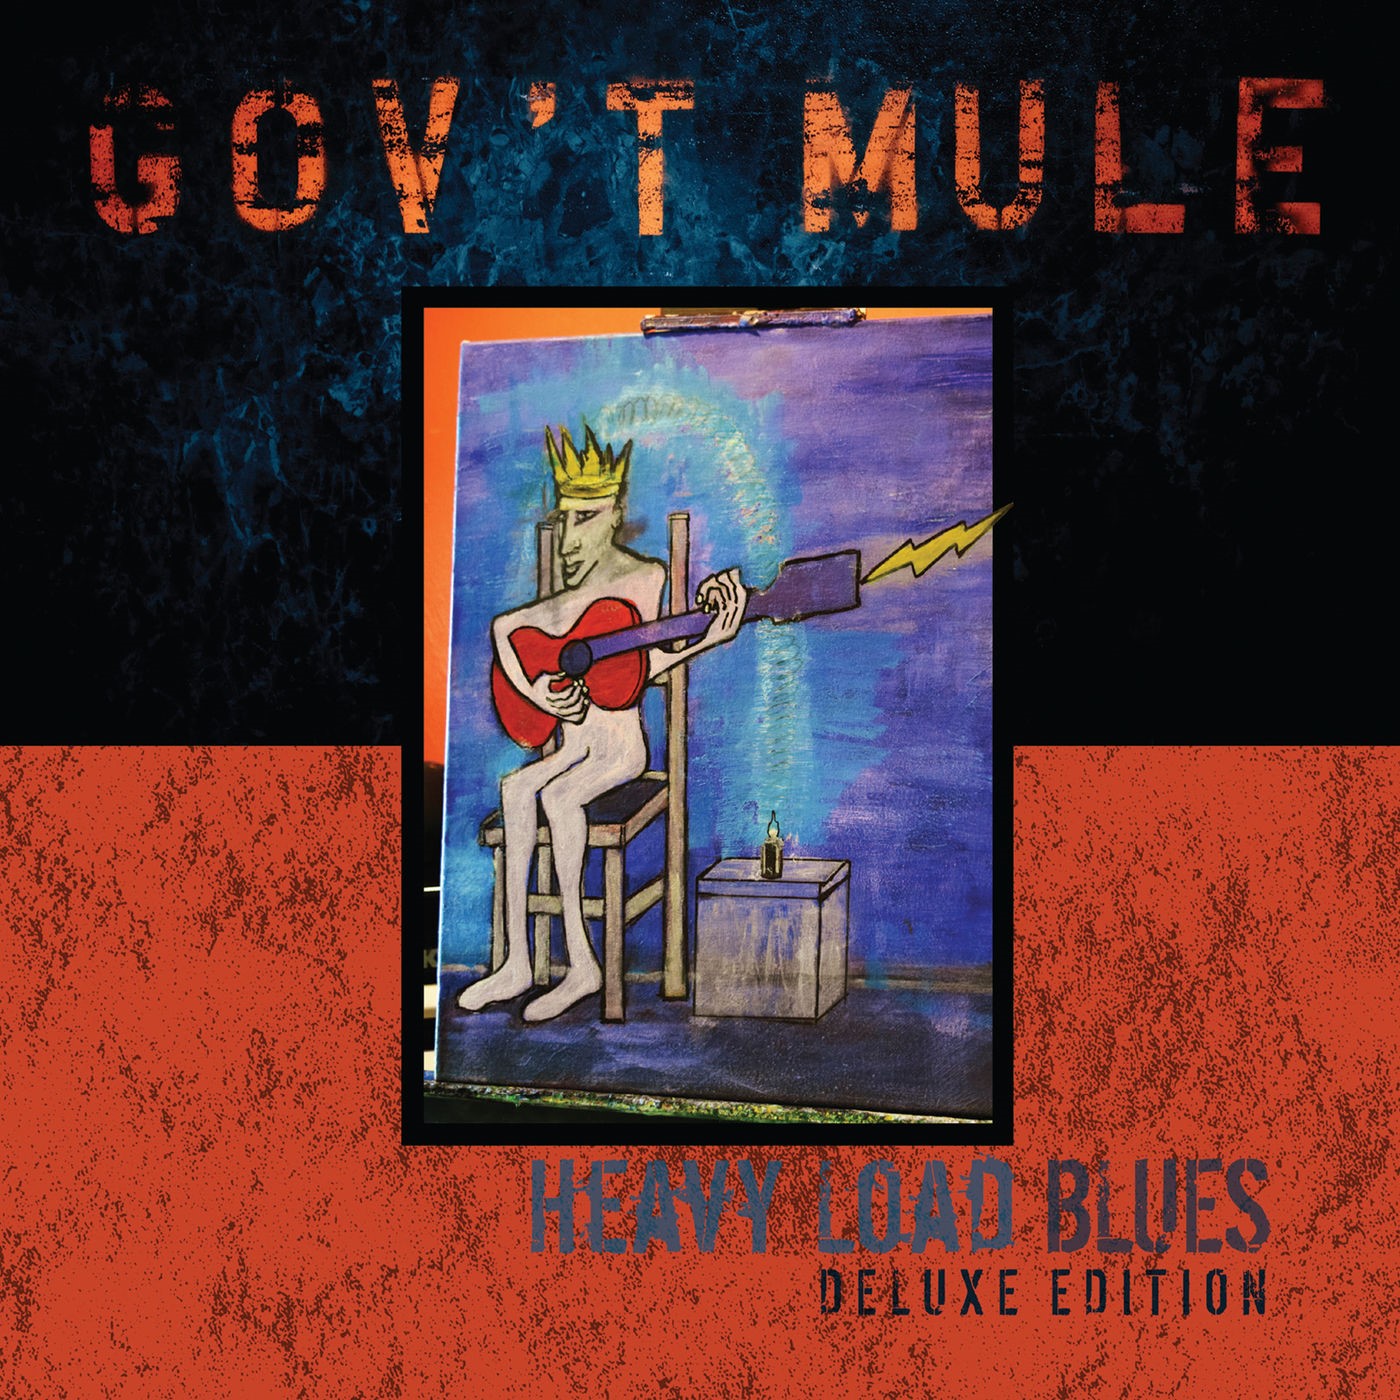 Gov't Mule - Heavy Load Blues DeLuxe Edition in DTS-wav ( OSV )